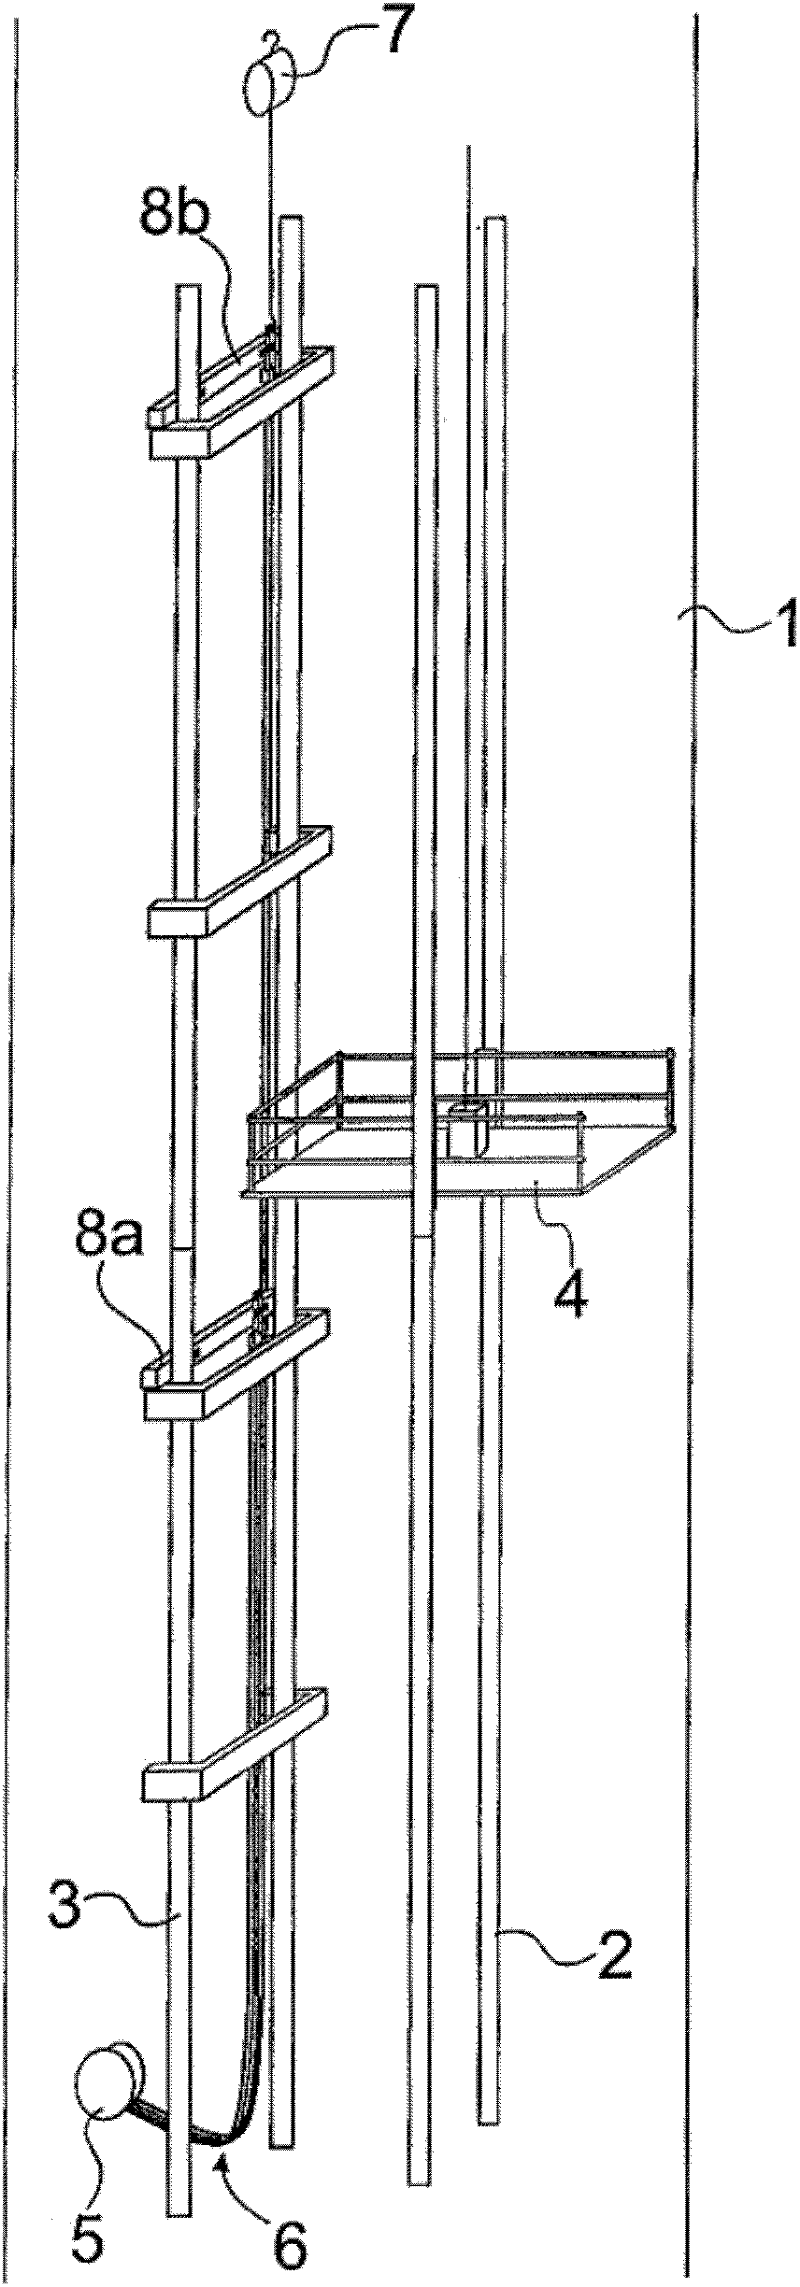 Method for installing the hoisting roping of an elevator